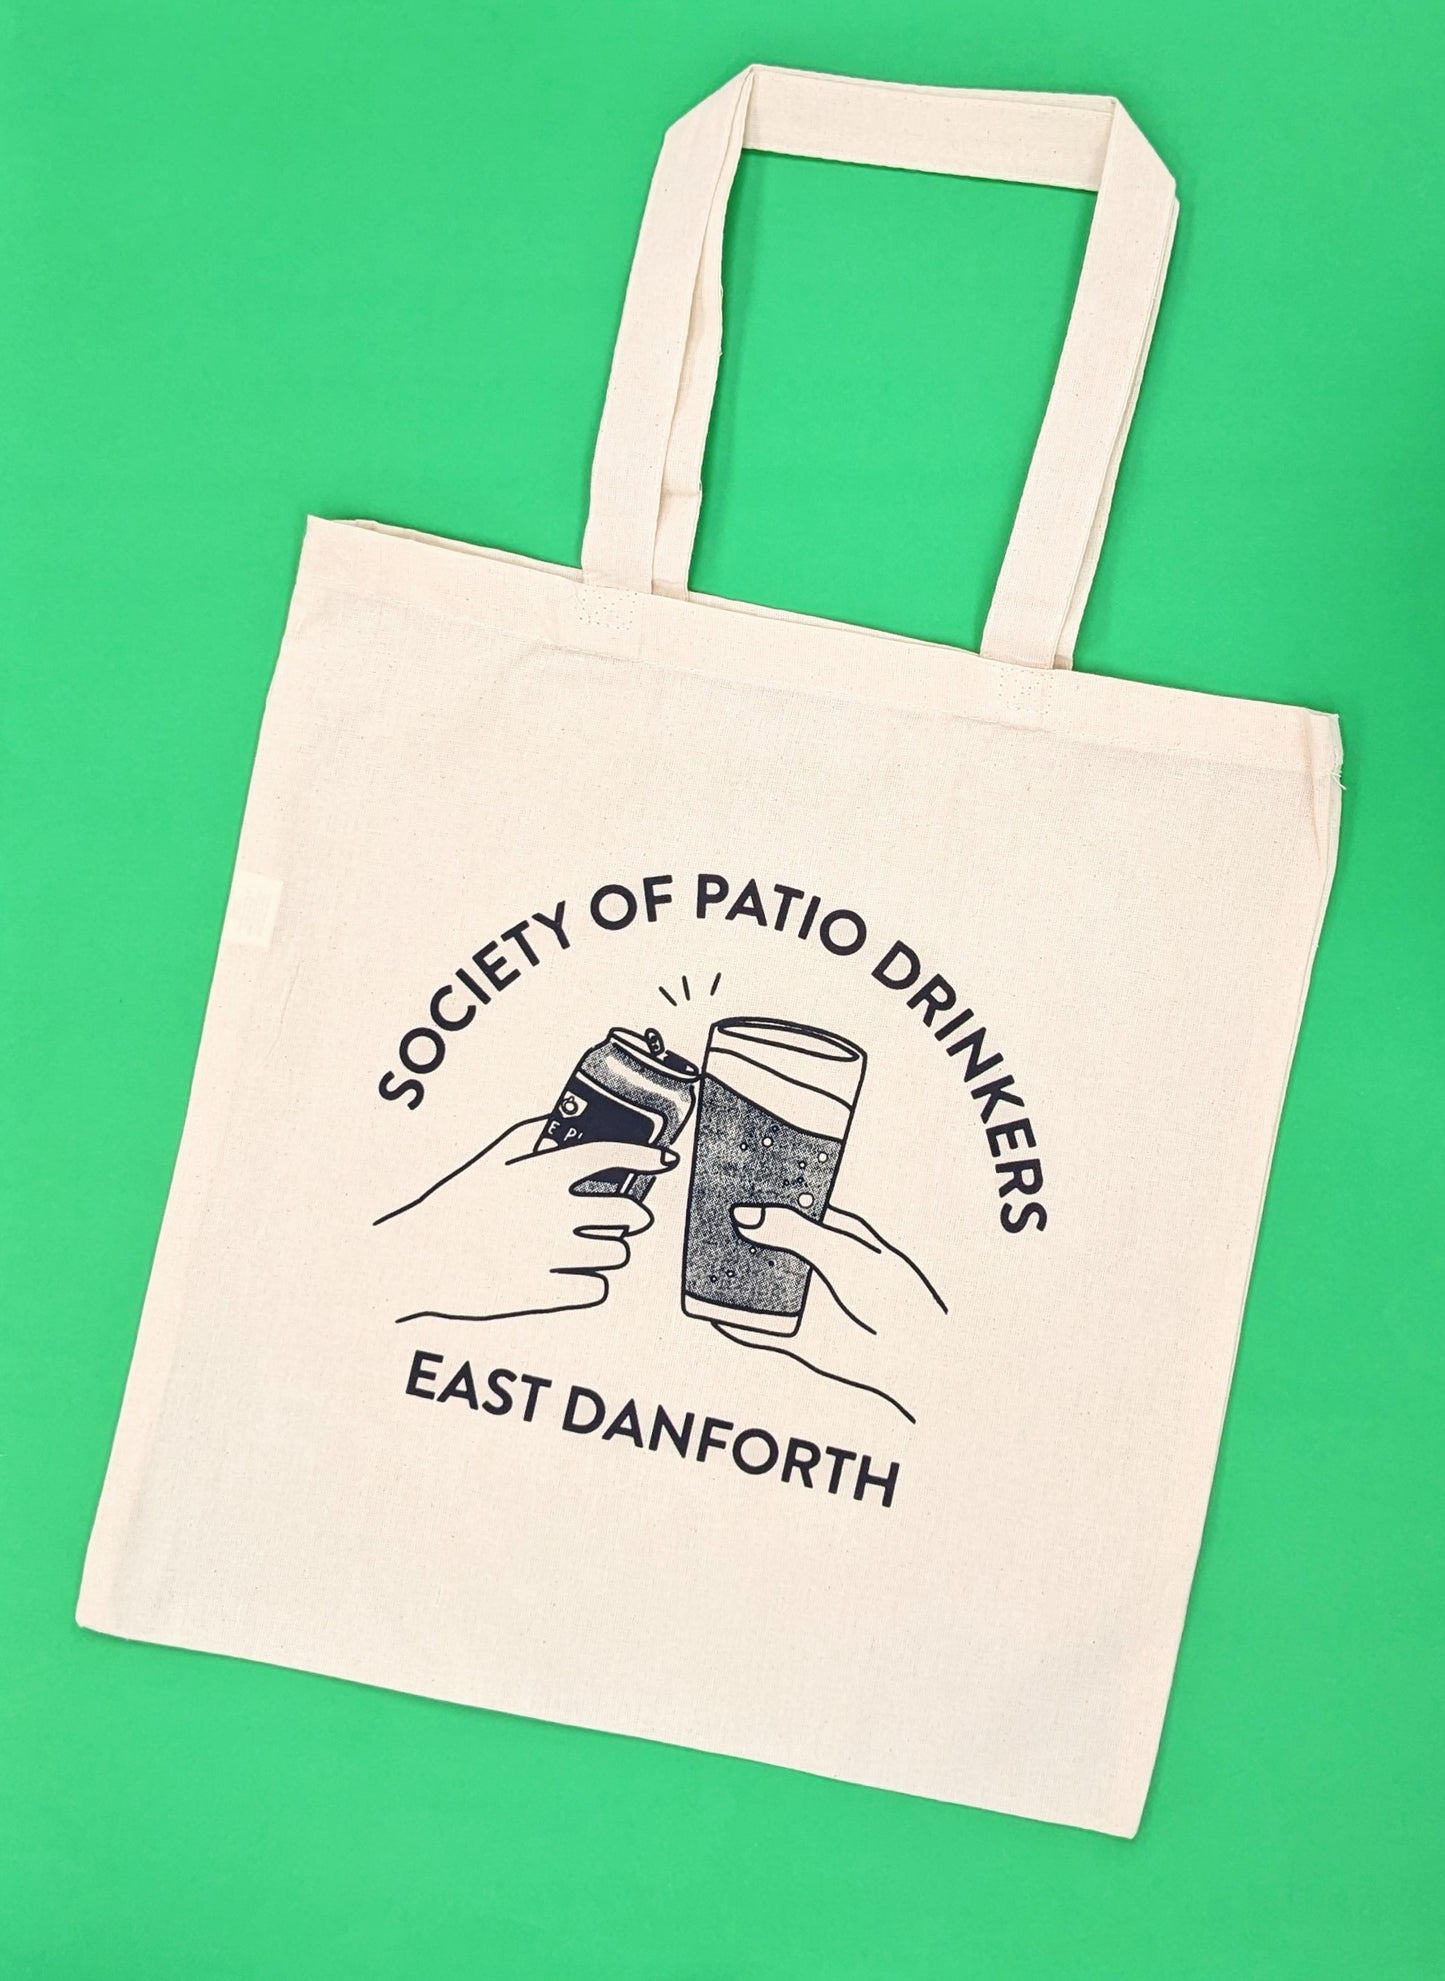 Society of Patio Drinkers Tote